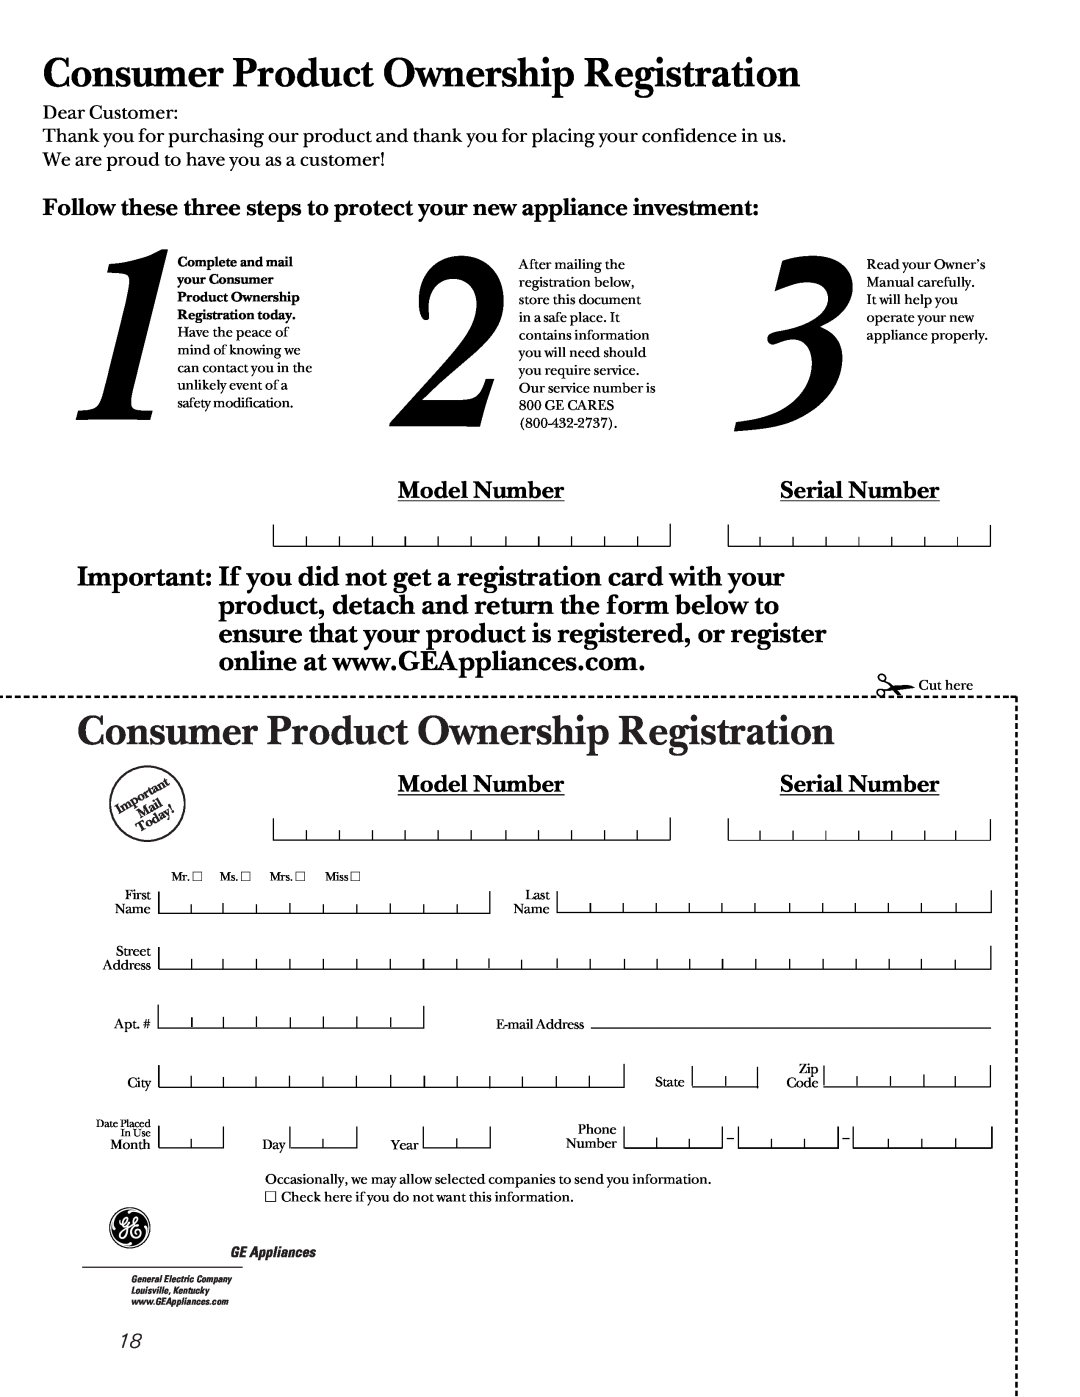 GE AG_07 operating instructions Model Number, Serial Number, Consumer Product Ownership Registration 